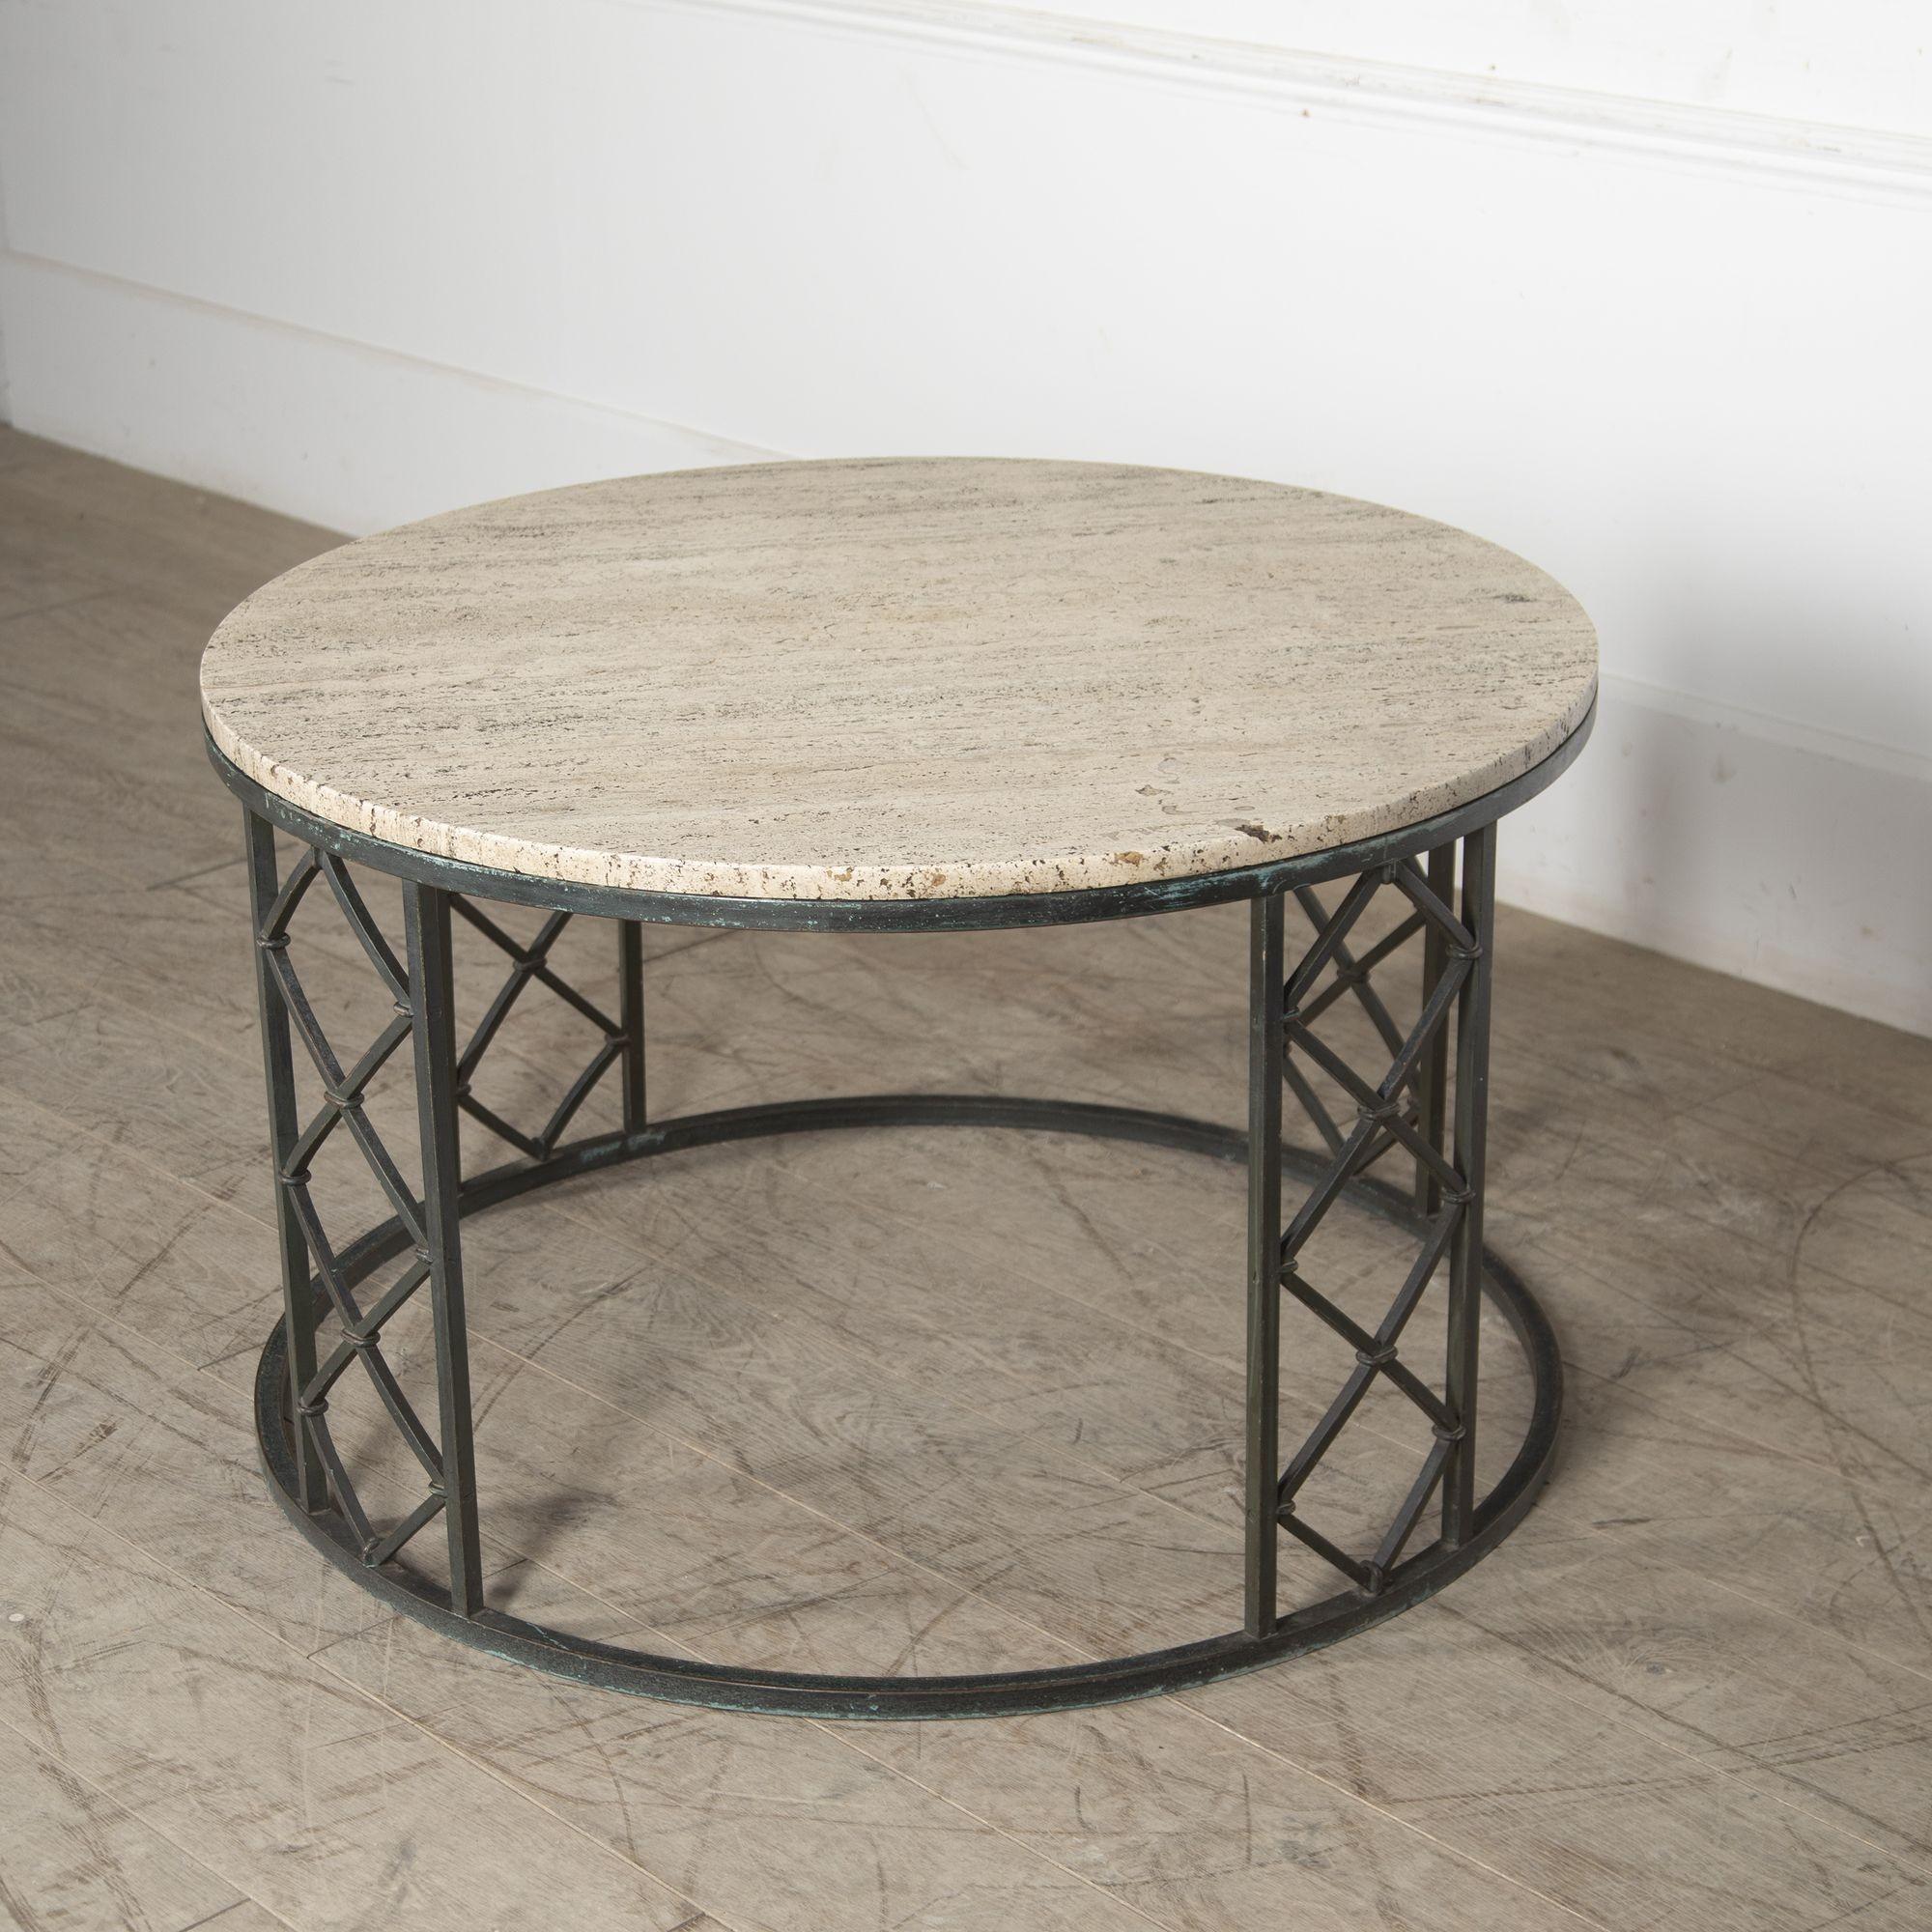 Fabulous 1940’s French high coffee table.
With a wrought iron frame and a porous travertine top, this gorgeous coffee table would make a very elegant piece in any living space.